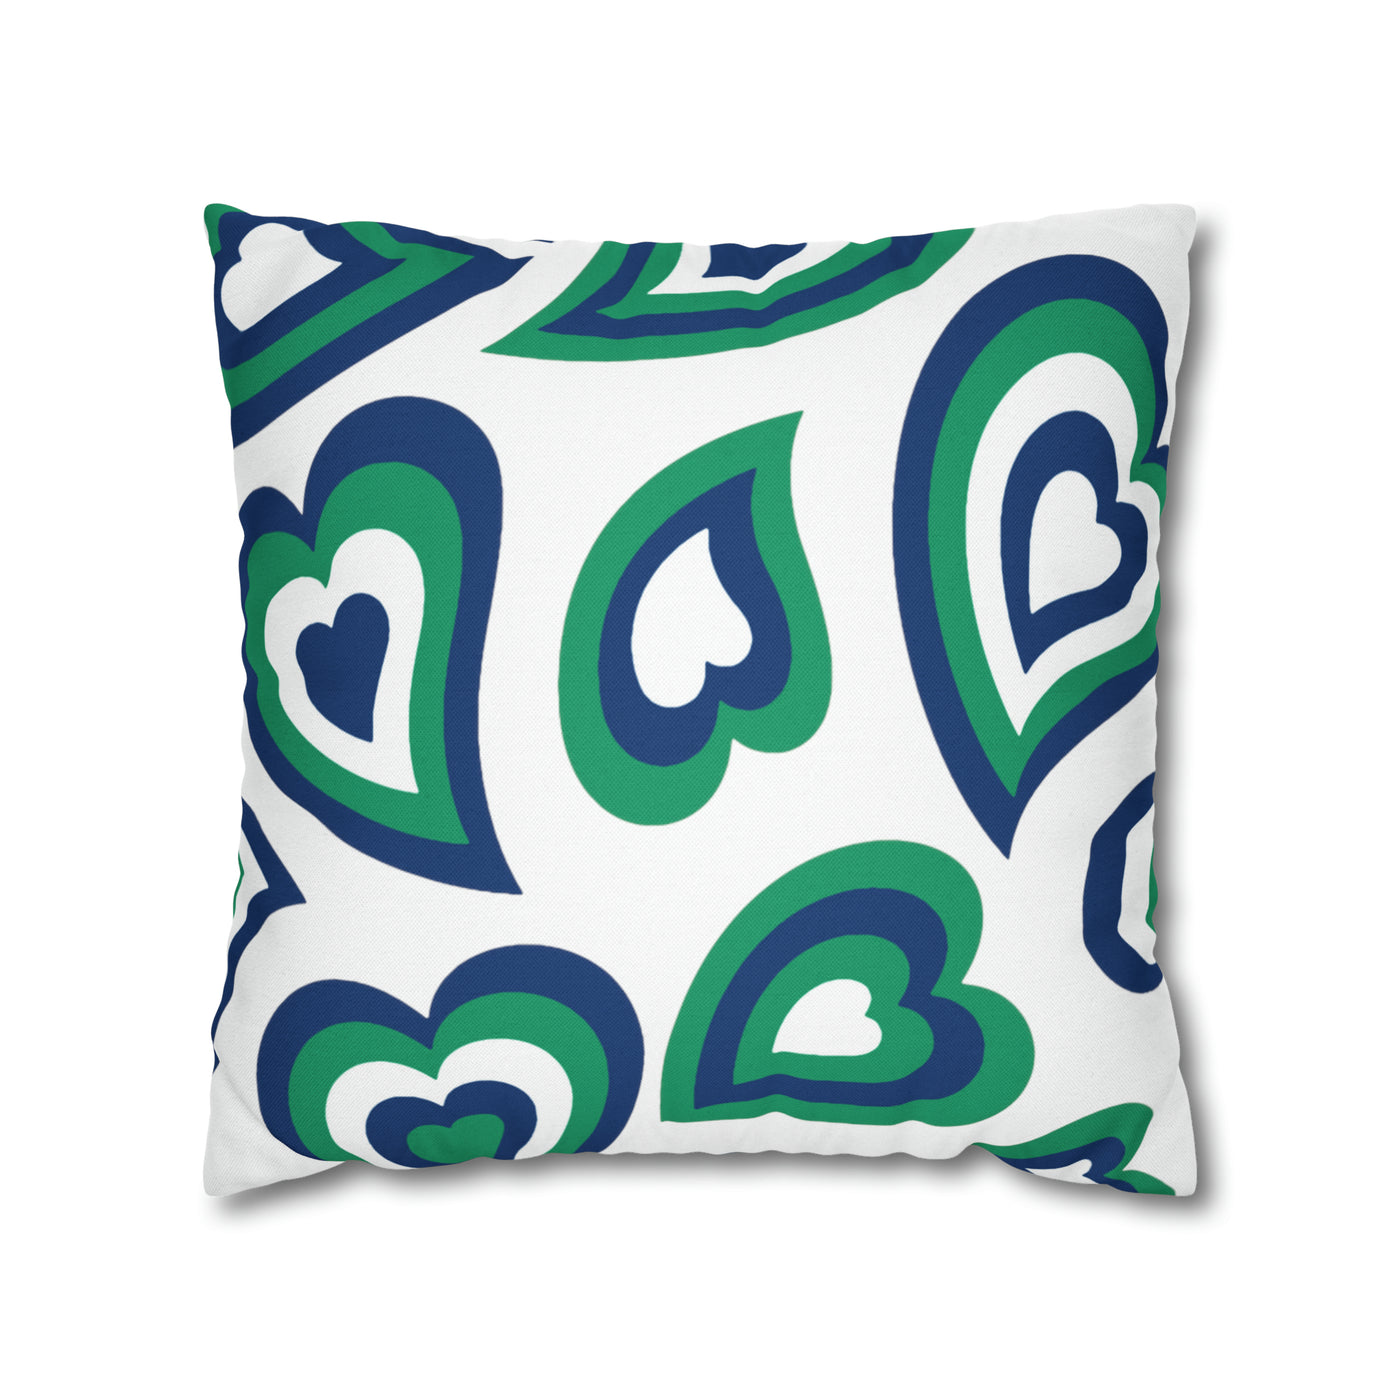 Retro Heart Pillow - blue and green, Heart Pillow, Hearts, Valentine's Day, FGCU, Florida Gulf Coast, Bed Party Pillow, Camp, dorm decor,